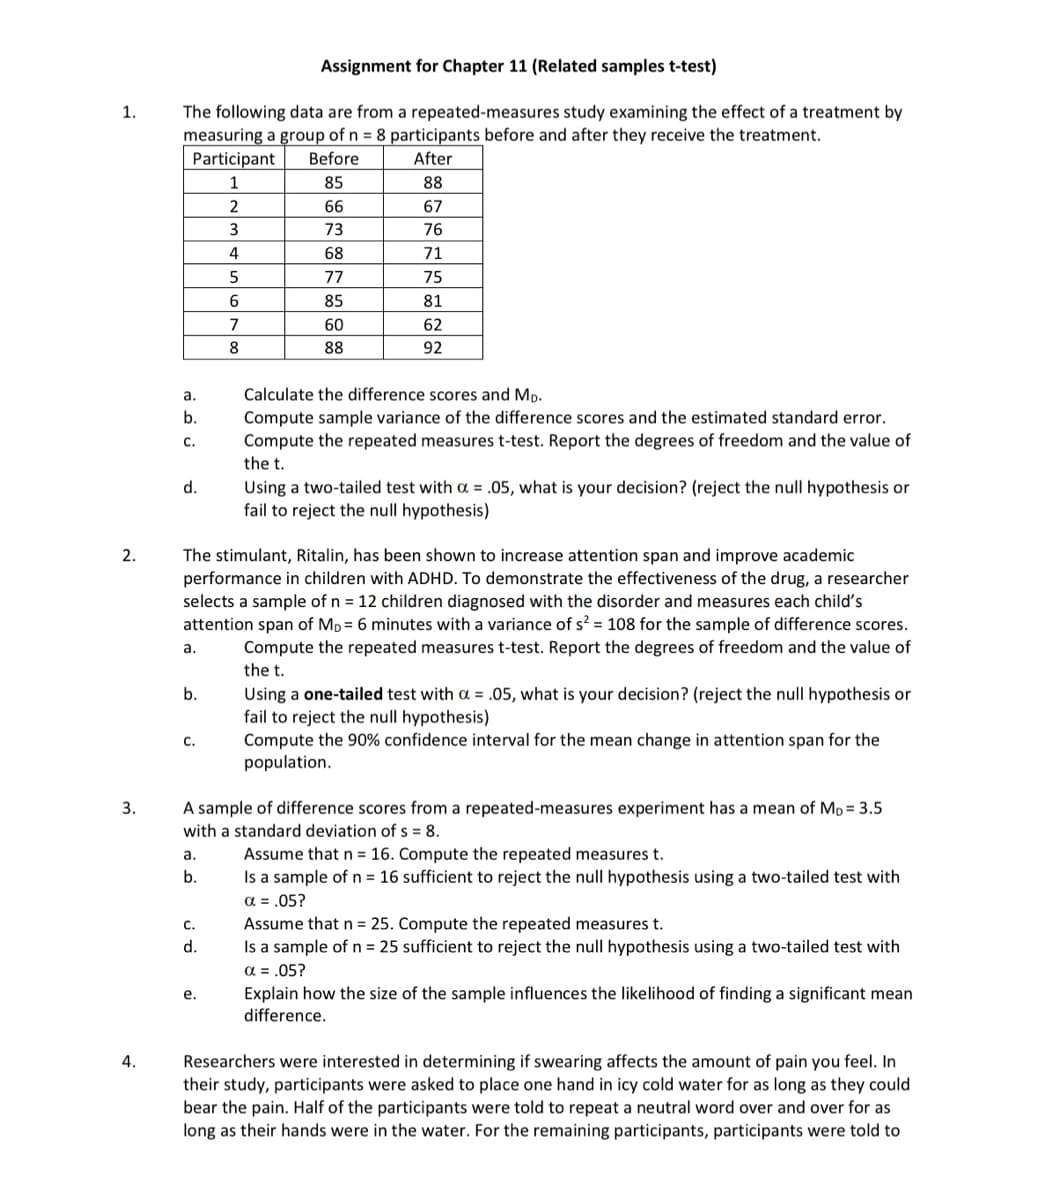 1.
Assignment for Chapter 11 (Related samples t-test)
The following data are from a repeated-measures study examining the effect of a treatment by
measuring a group of n = 8 participants before and after they receive the treatment.
Participant
Before
2.
3.
4.
After
1
85
88
2
66
67
3
73
76
4
68
71
5
77
75
6
85
81
7
60
62
8
88
92
a.
b.
C.
d.
Calculate the difference scores and MD.
Compute sample variance of the difference scores and the estimated standard error.
Compute the repeated measures t-test. Report the degrees of freedom and the value of
the t.
Using a two-tailed test with α = .05, what is your decision? (reject the null hypothesis or
fail to reject the null hypothesis)
The stimulant, Ritalin, has been shown to increase attention span and improve academic
performance in children with ADHD. To demonstrate the effectiveness of the drug, a researcher
selects a sample of n = 12 children diagnosed with the disorder and measures each child's
attention span of MD = 6 minutes with a variance of s² = 108 for the sample of difference scores.
Compute the repeated measures t-test. Report the degrees of freedom and the value of
the t.
a.
b.
C.
Using a one-tailed test with a = .05, what is your decision? (reject the null hypothesis or
fail to reject the null hypothesis)
Compute the 90% confidence interval for the mean change in attention span for the
population.
A sample of difference scores from a repeated-measures experiment has a mean of MD = 3.5
with a standard deviation of s = 8.
a.
b.
Assume that n = 16. Compute the repeated measures t.
Is a sample of n = 16 sufficient to reject the null hypothesis using a two-tailed test with
α = .05?
C.
d.
e.
Assume that n = 25. Compute the repeated measures t.
Is a sample of n = 25 sufficient to reject the null hypothesis using a two-tailed test with
α = .05?
Explain how the size of the sample influences the likelihood of finding a significant mean
difference.
Researchers were interested in determining if swearing affects the amount of pain you feel. In
their study, participants were asked to place one hand in icy cold water for as long as they could
bear the pain. Half of the participants were told to repeat a neutral word over and over for as
long as their hands were in the water. For the remaining participants, participants were told to